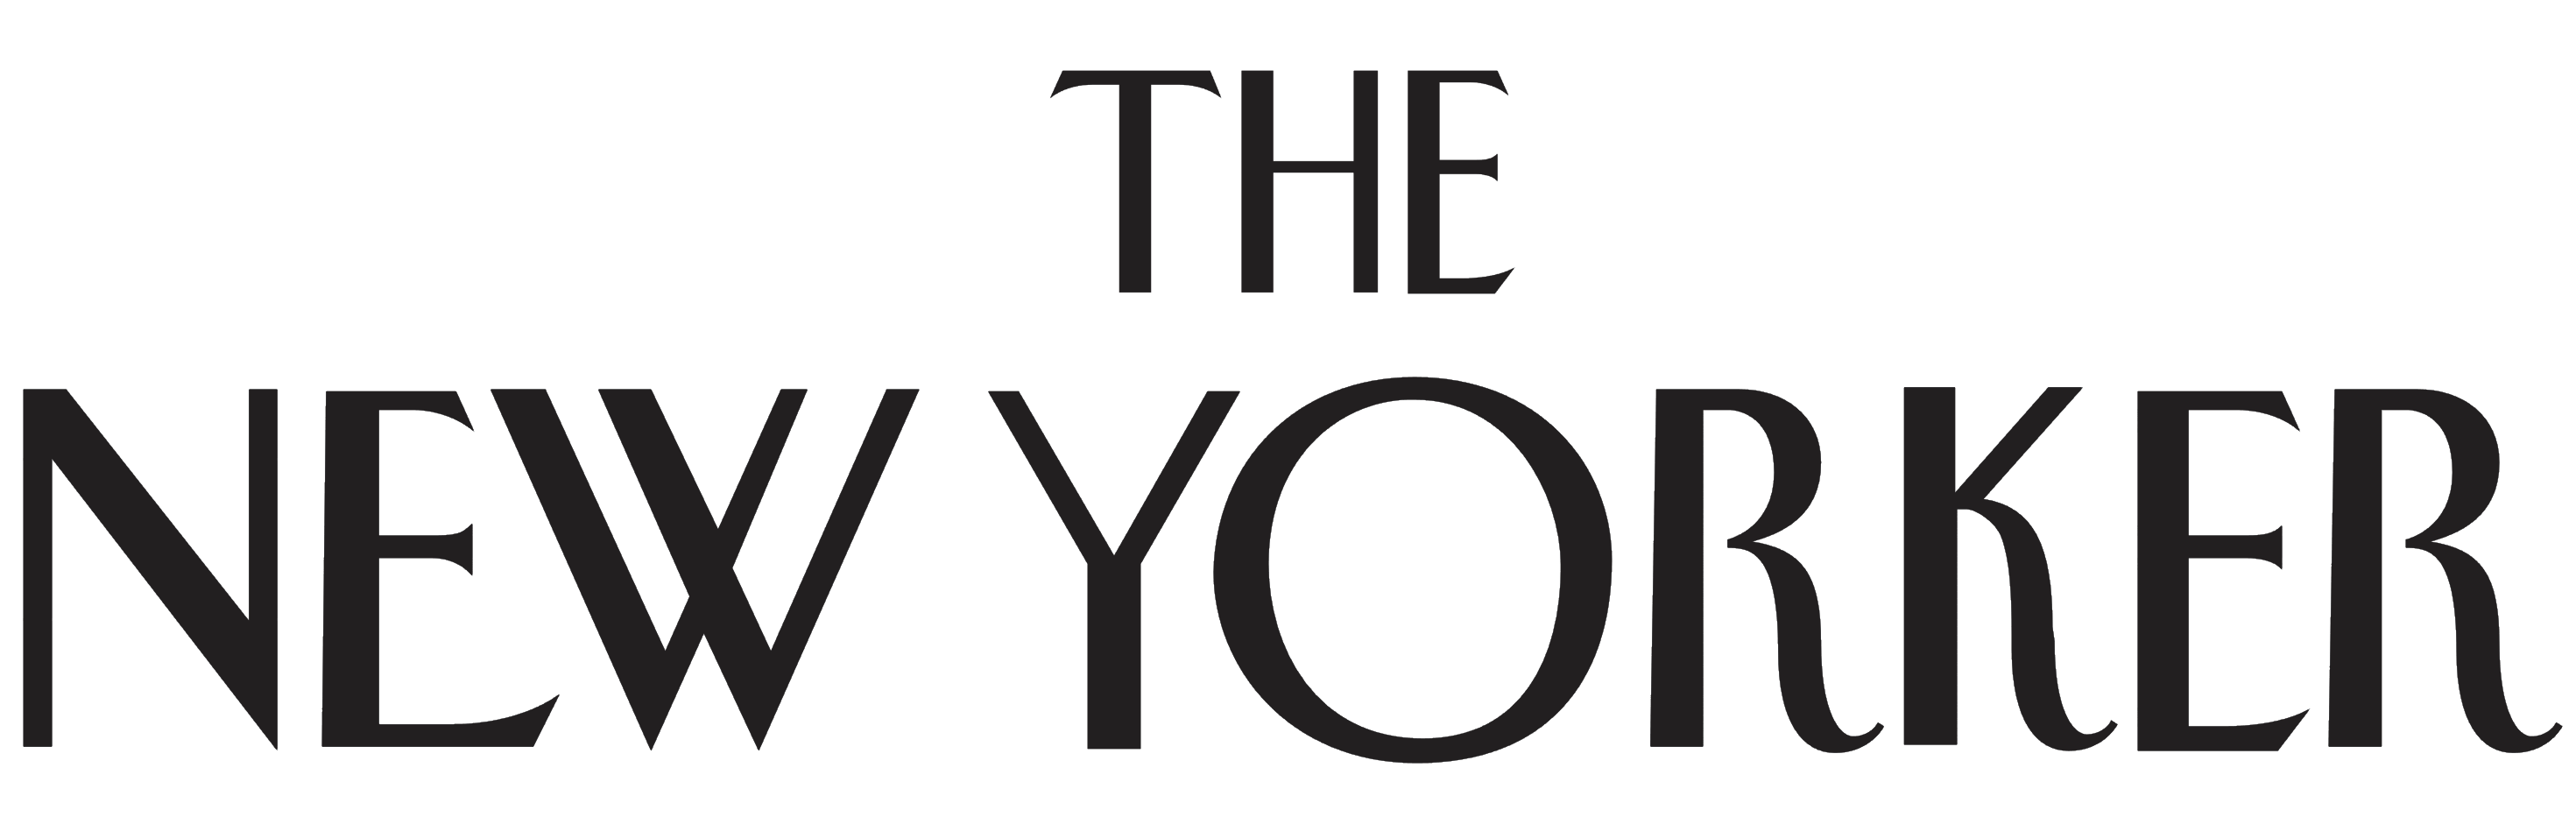 The_New_Yorker_logo